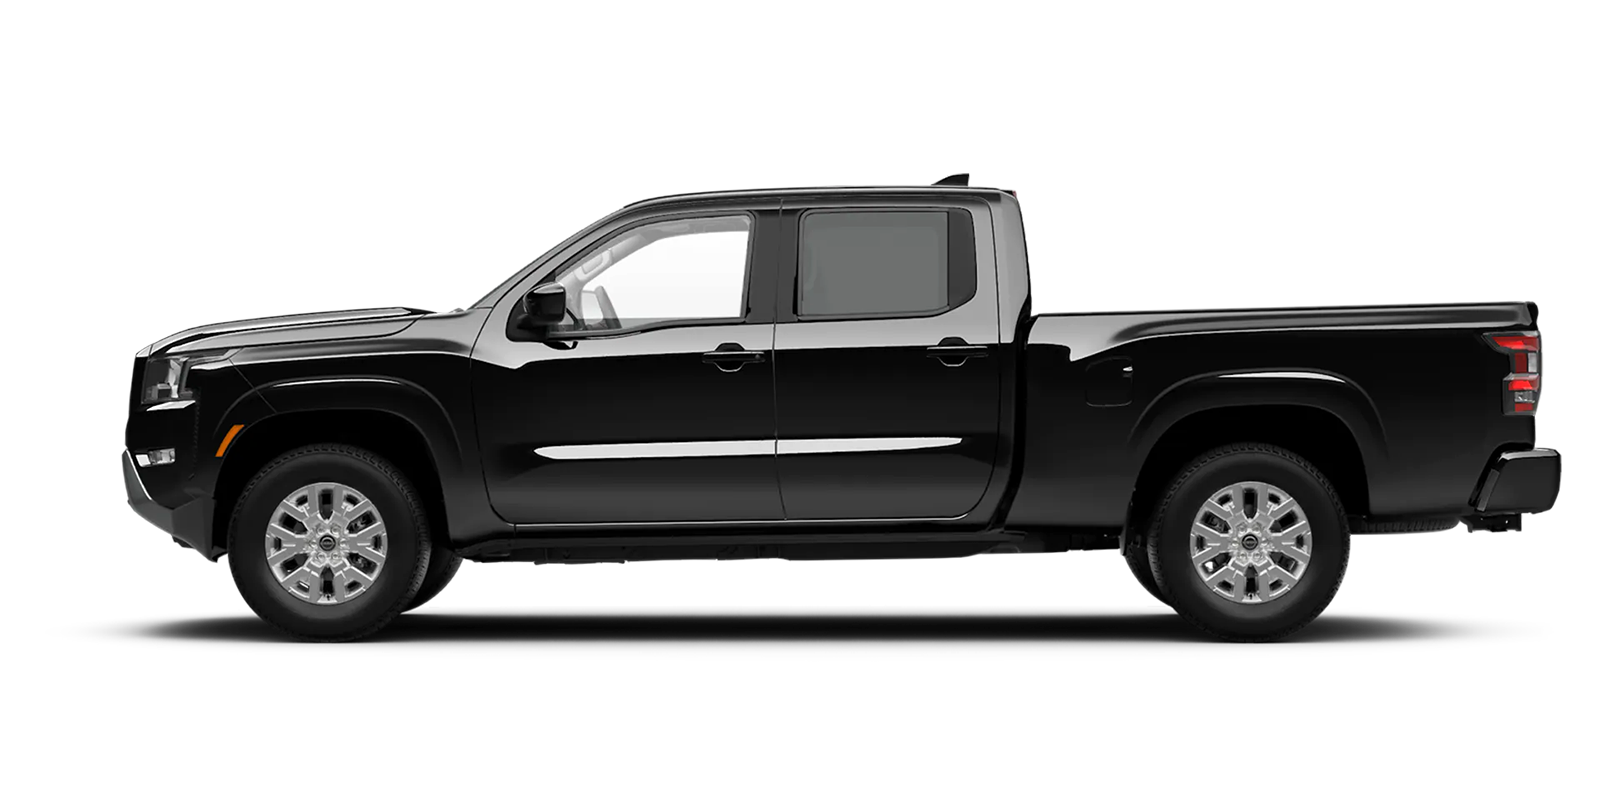 2022 Frontier Crew Cab Long Bed SV 4x2 in Super Black | Fort Collins Nissan in Fort Collins CO